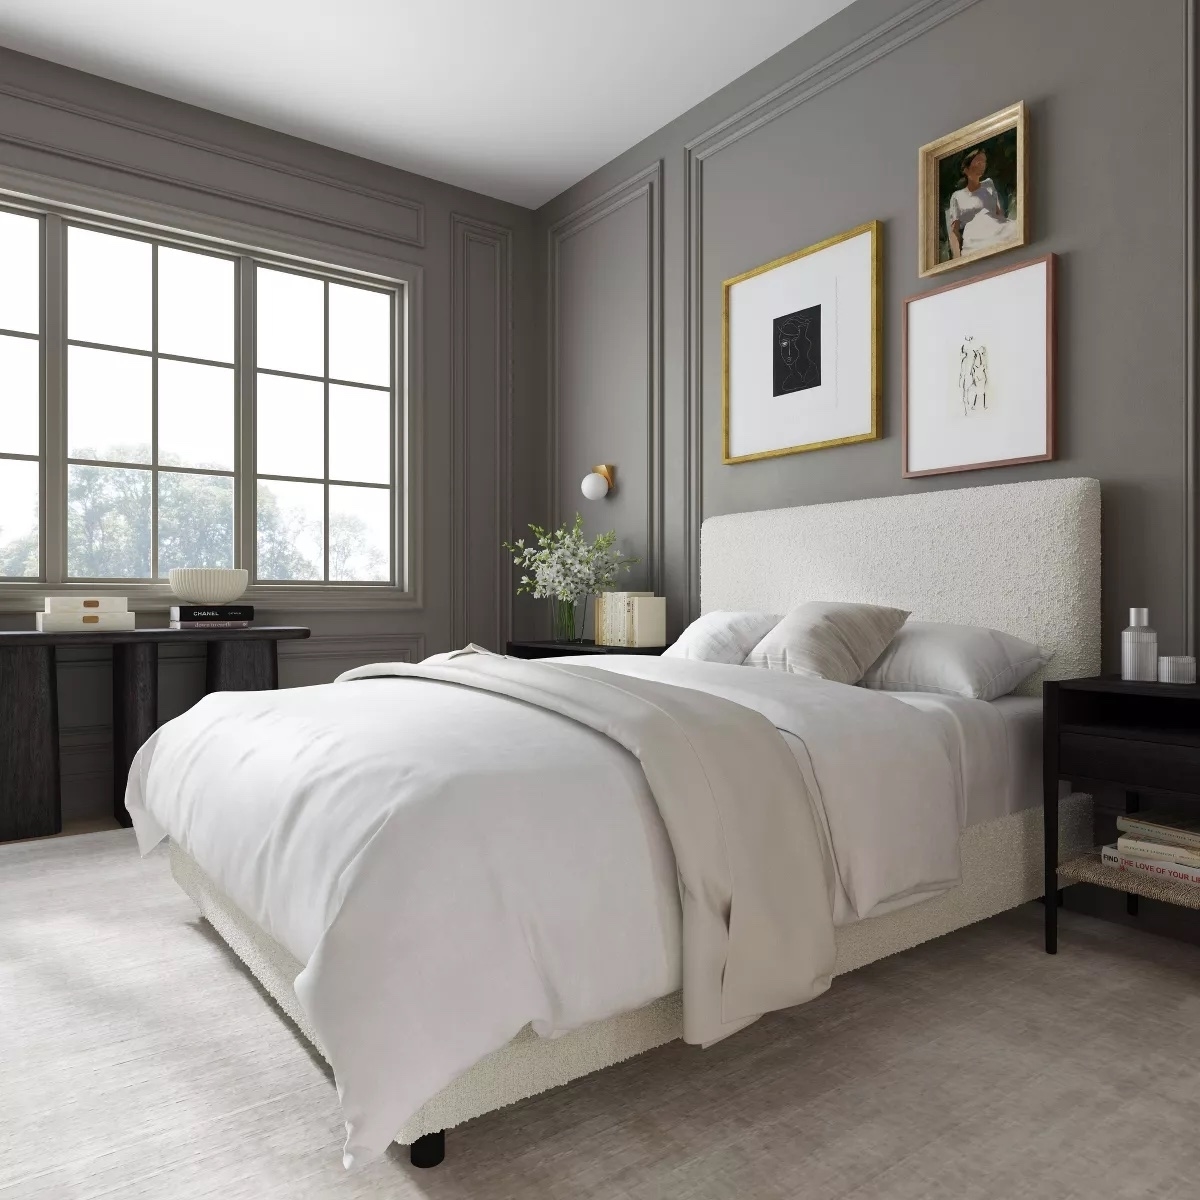 A neatly made bed with white bedding in a modern bedroom setting, suitable for shopping content focused on home decor